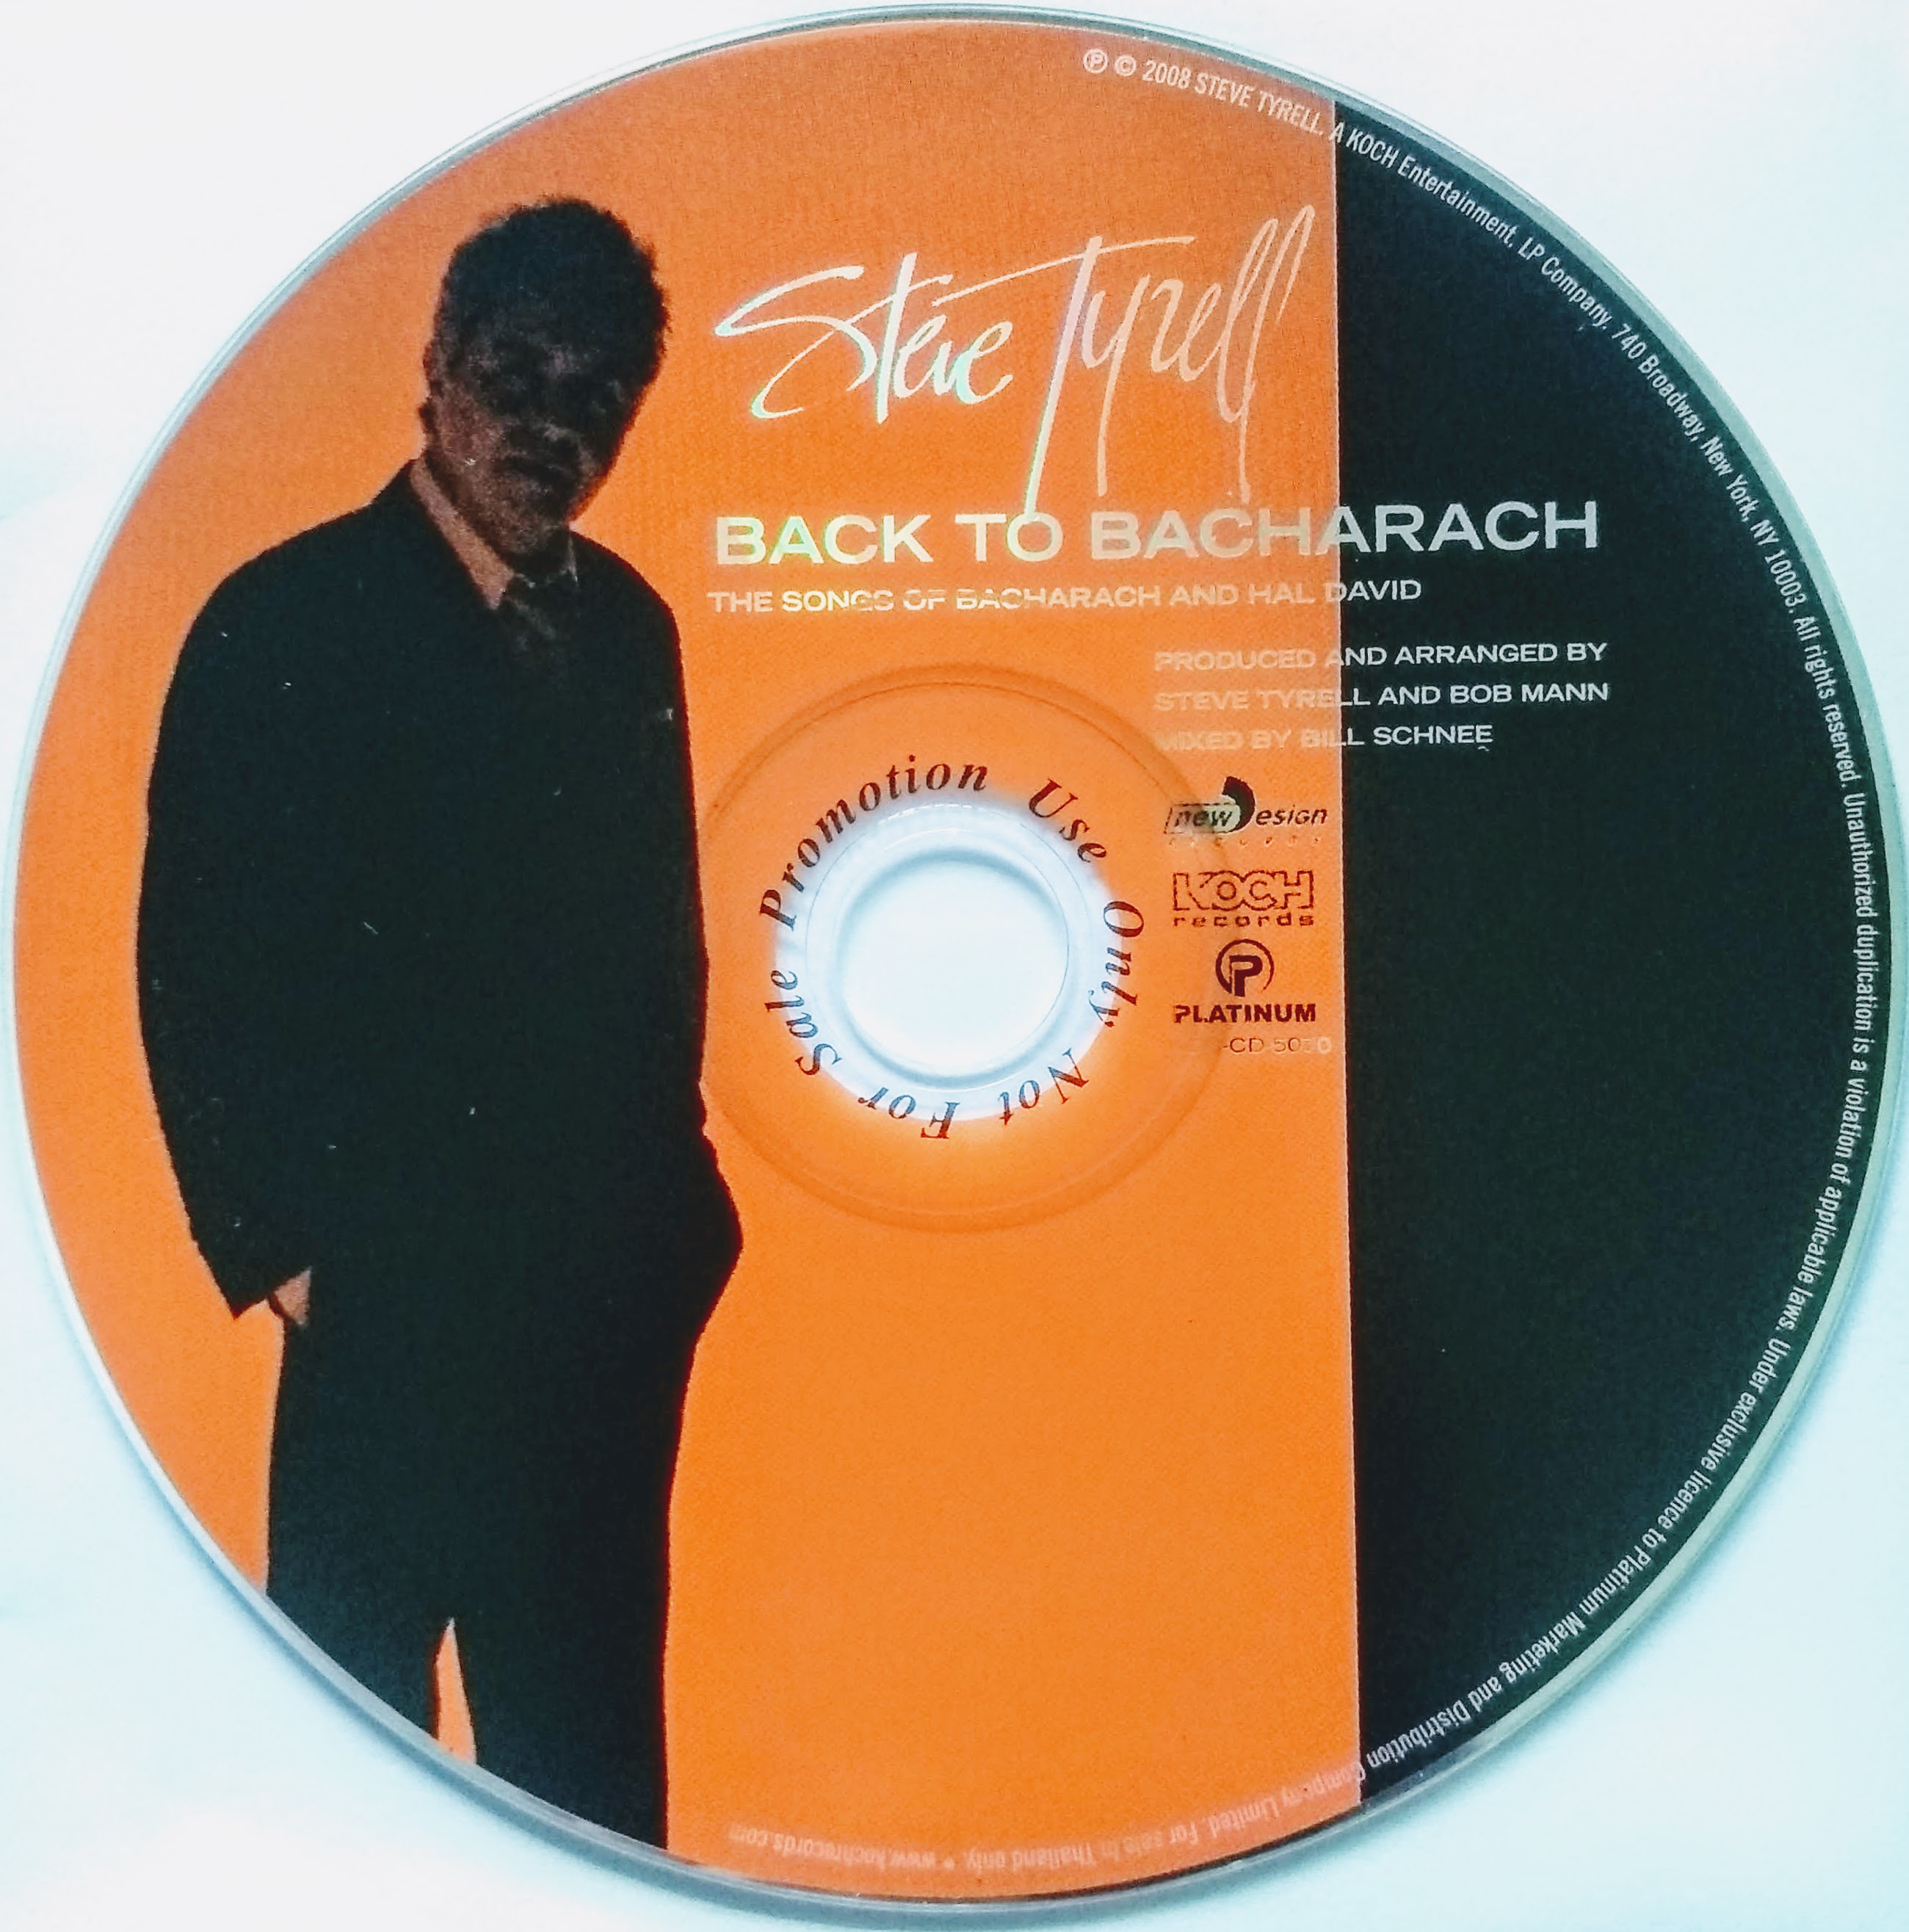 CD (Promotion) Steve Tyrell - Back To Bacharach (CD Only)